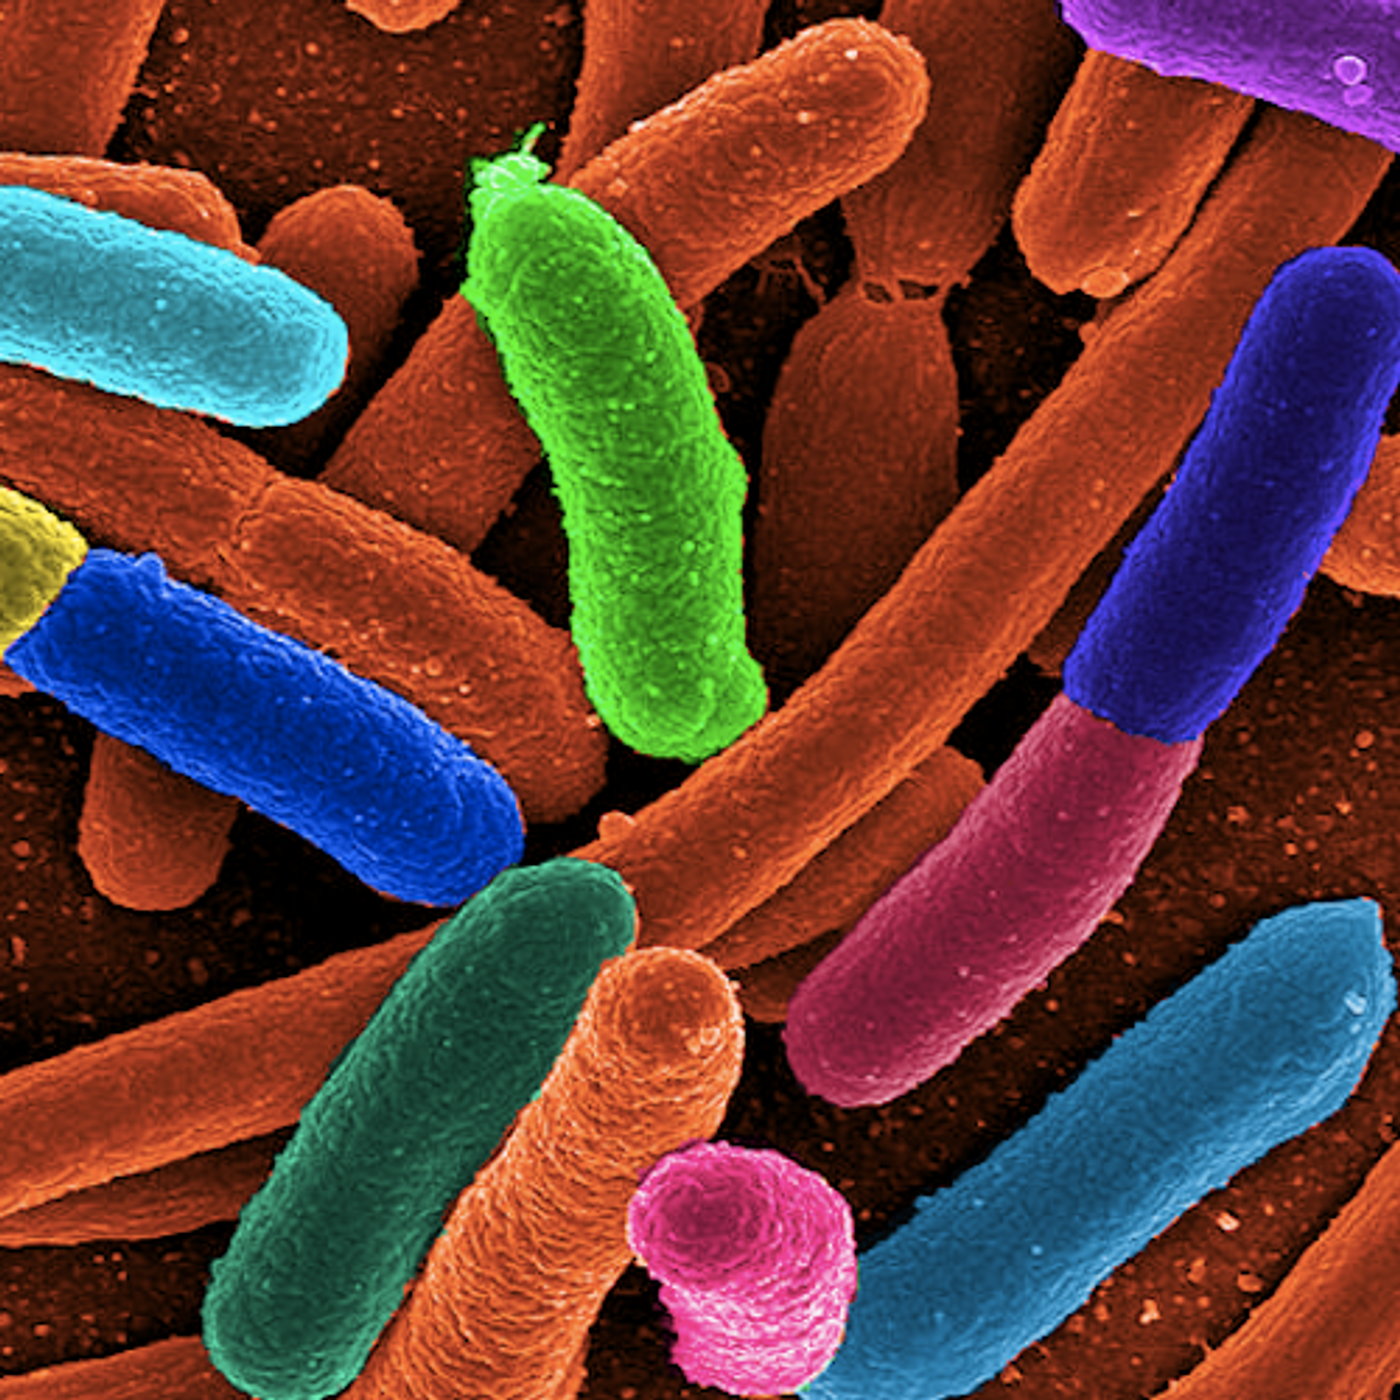 E. coli is a common bacterium used for this work. / Image credit: Wikimedia Commons/Mattosaurus